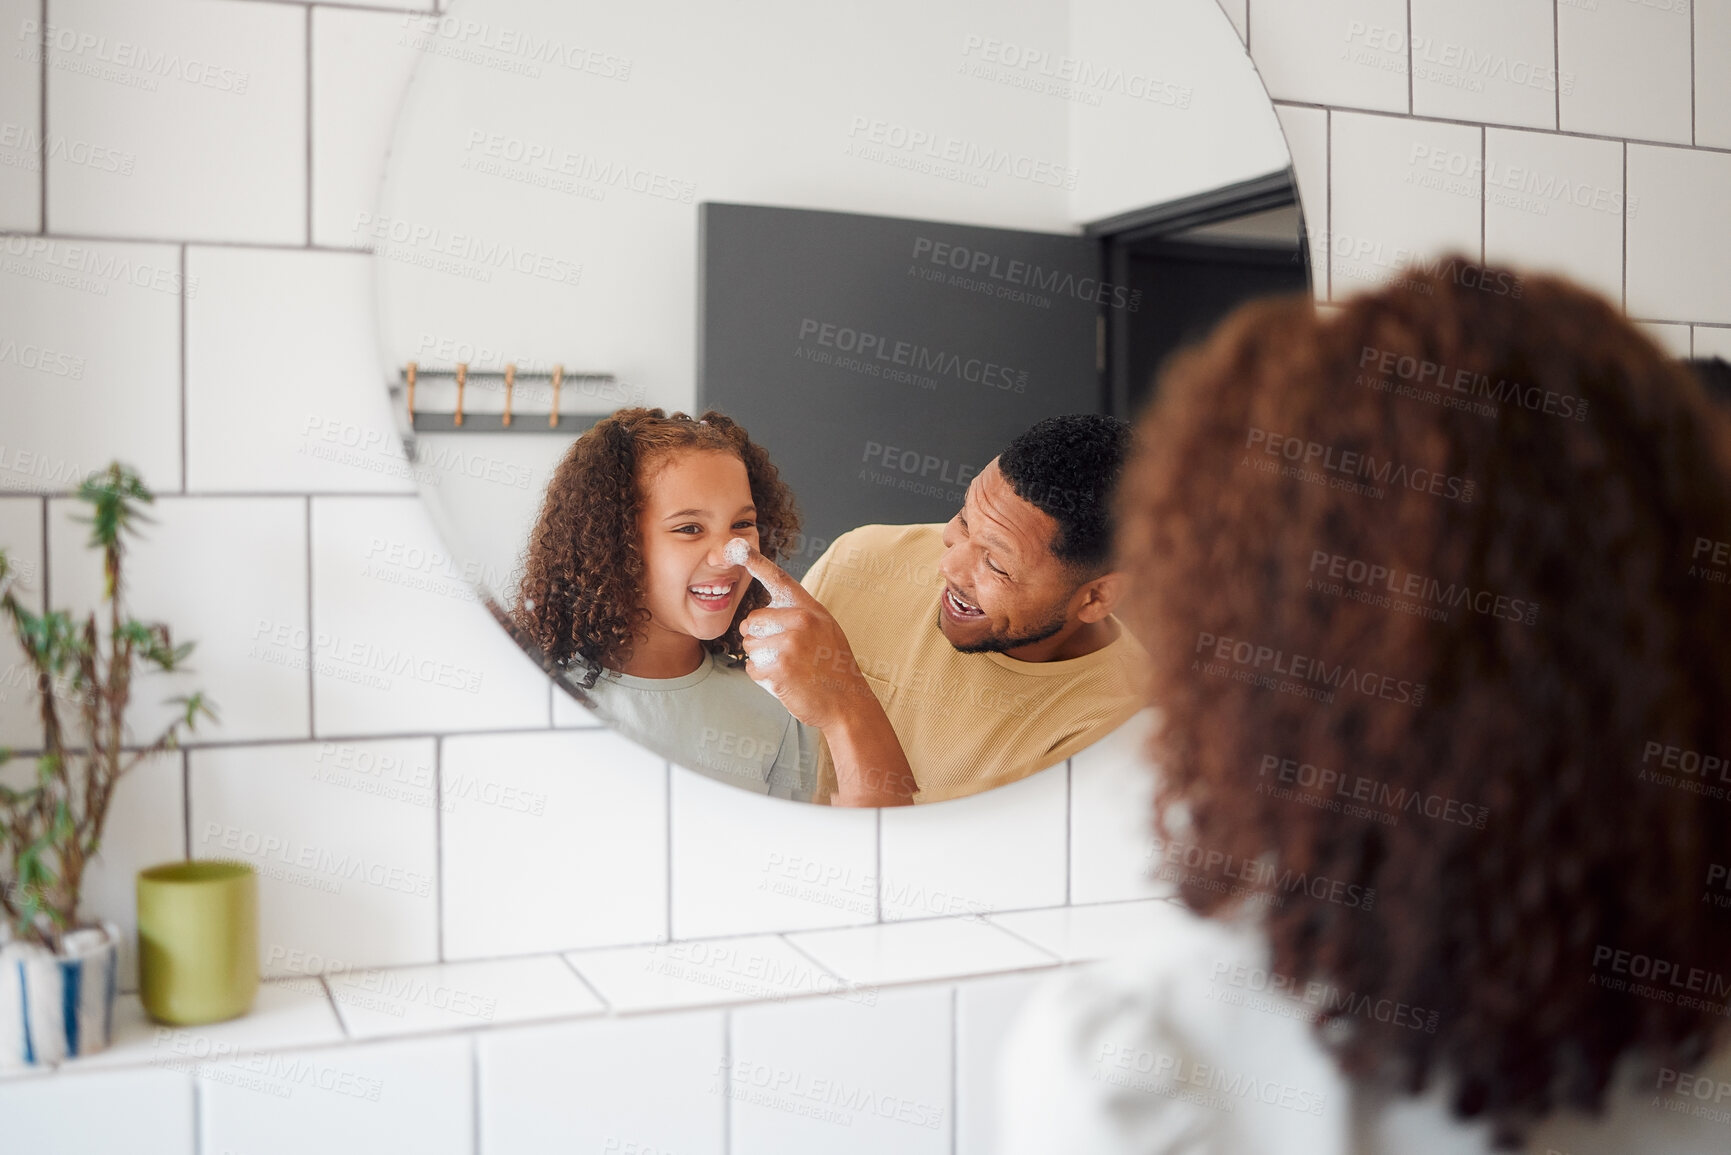 Buy stock photo Happy mixed race father and daughter washing their hands  together in a bathroom at home. Single African American parent teaching his daughter about hygiene while having fun and being playful